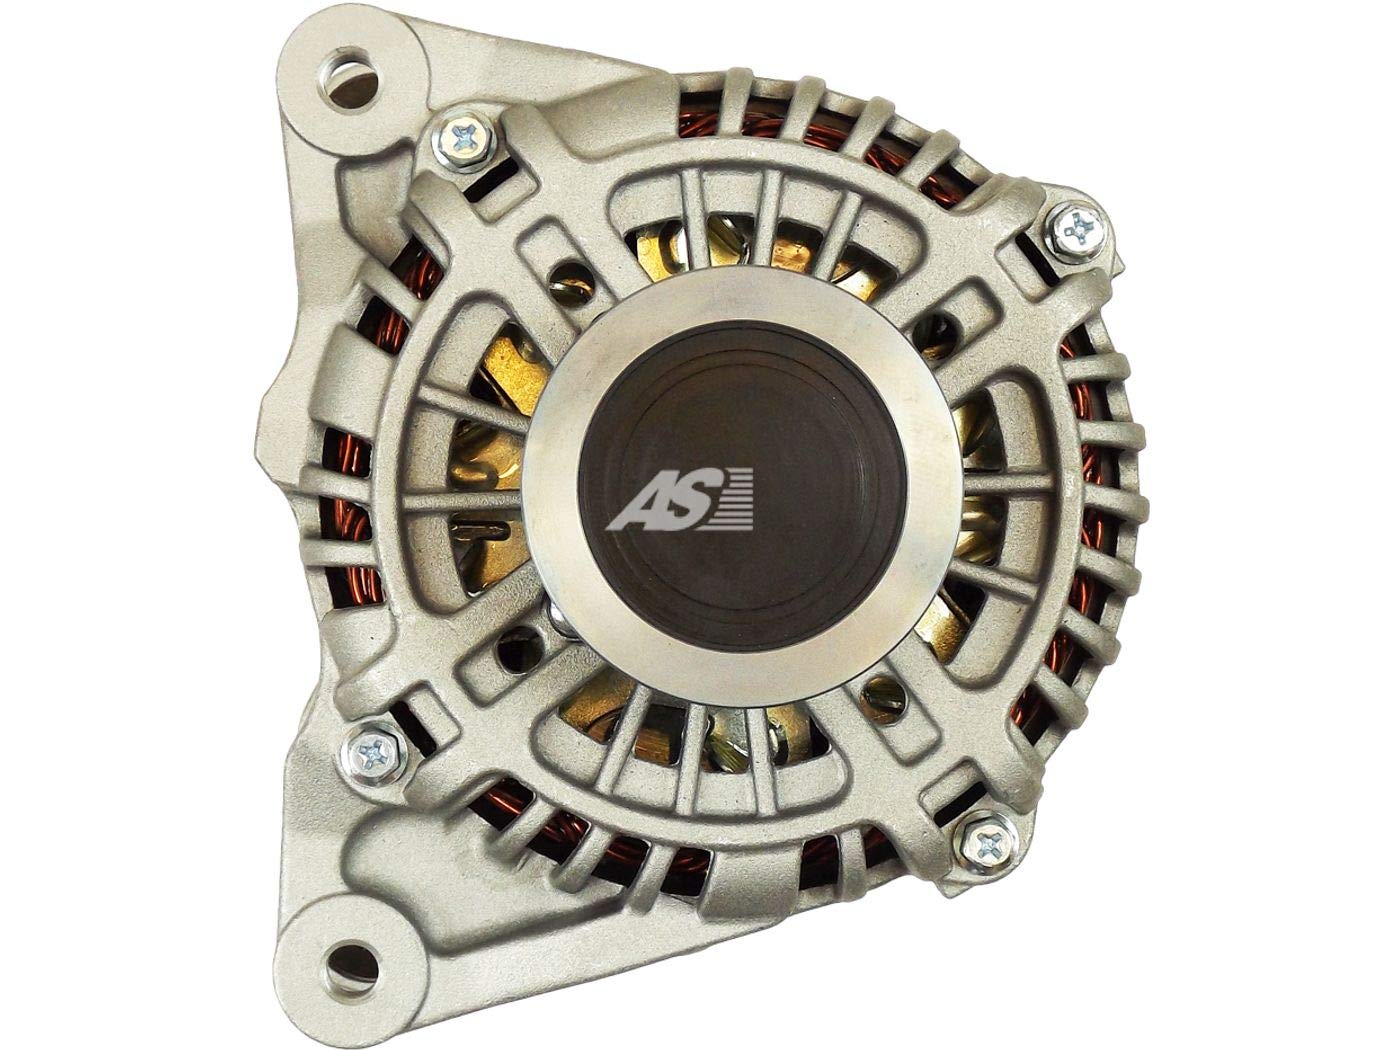 Brand new AS-PL Alternator with Free Wheel Pulley - A5058(P) von AS-PL